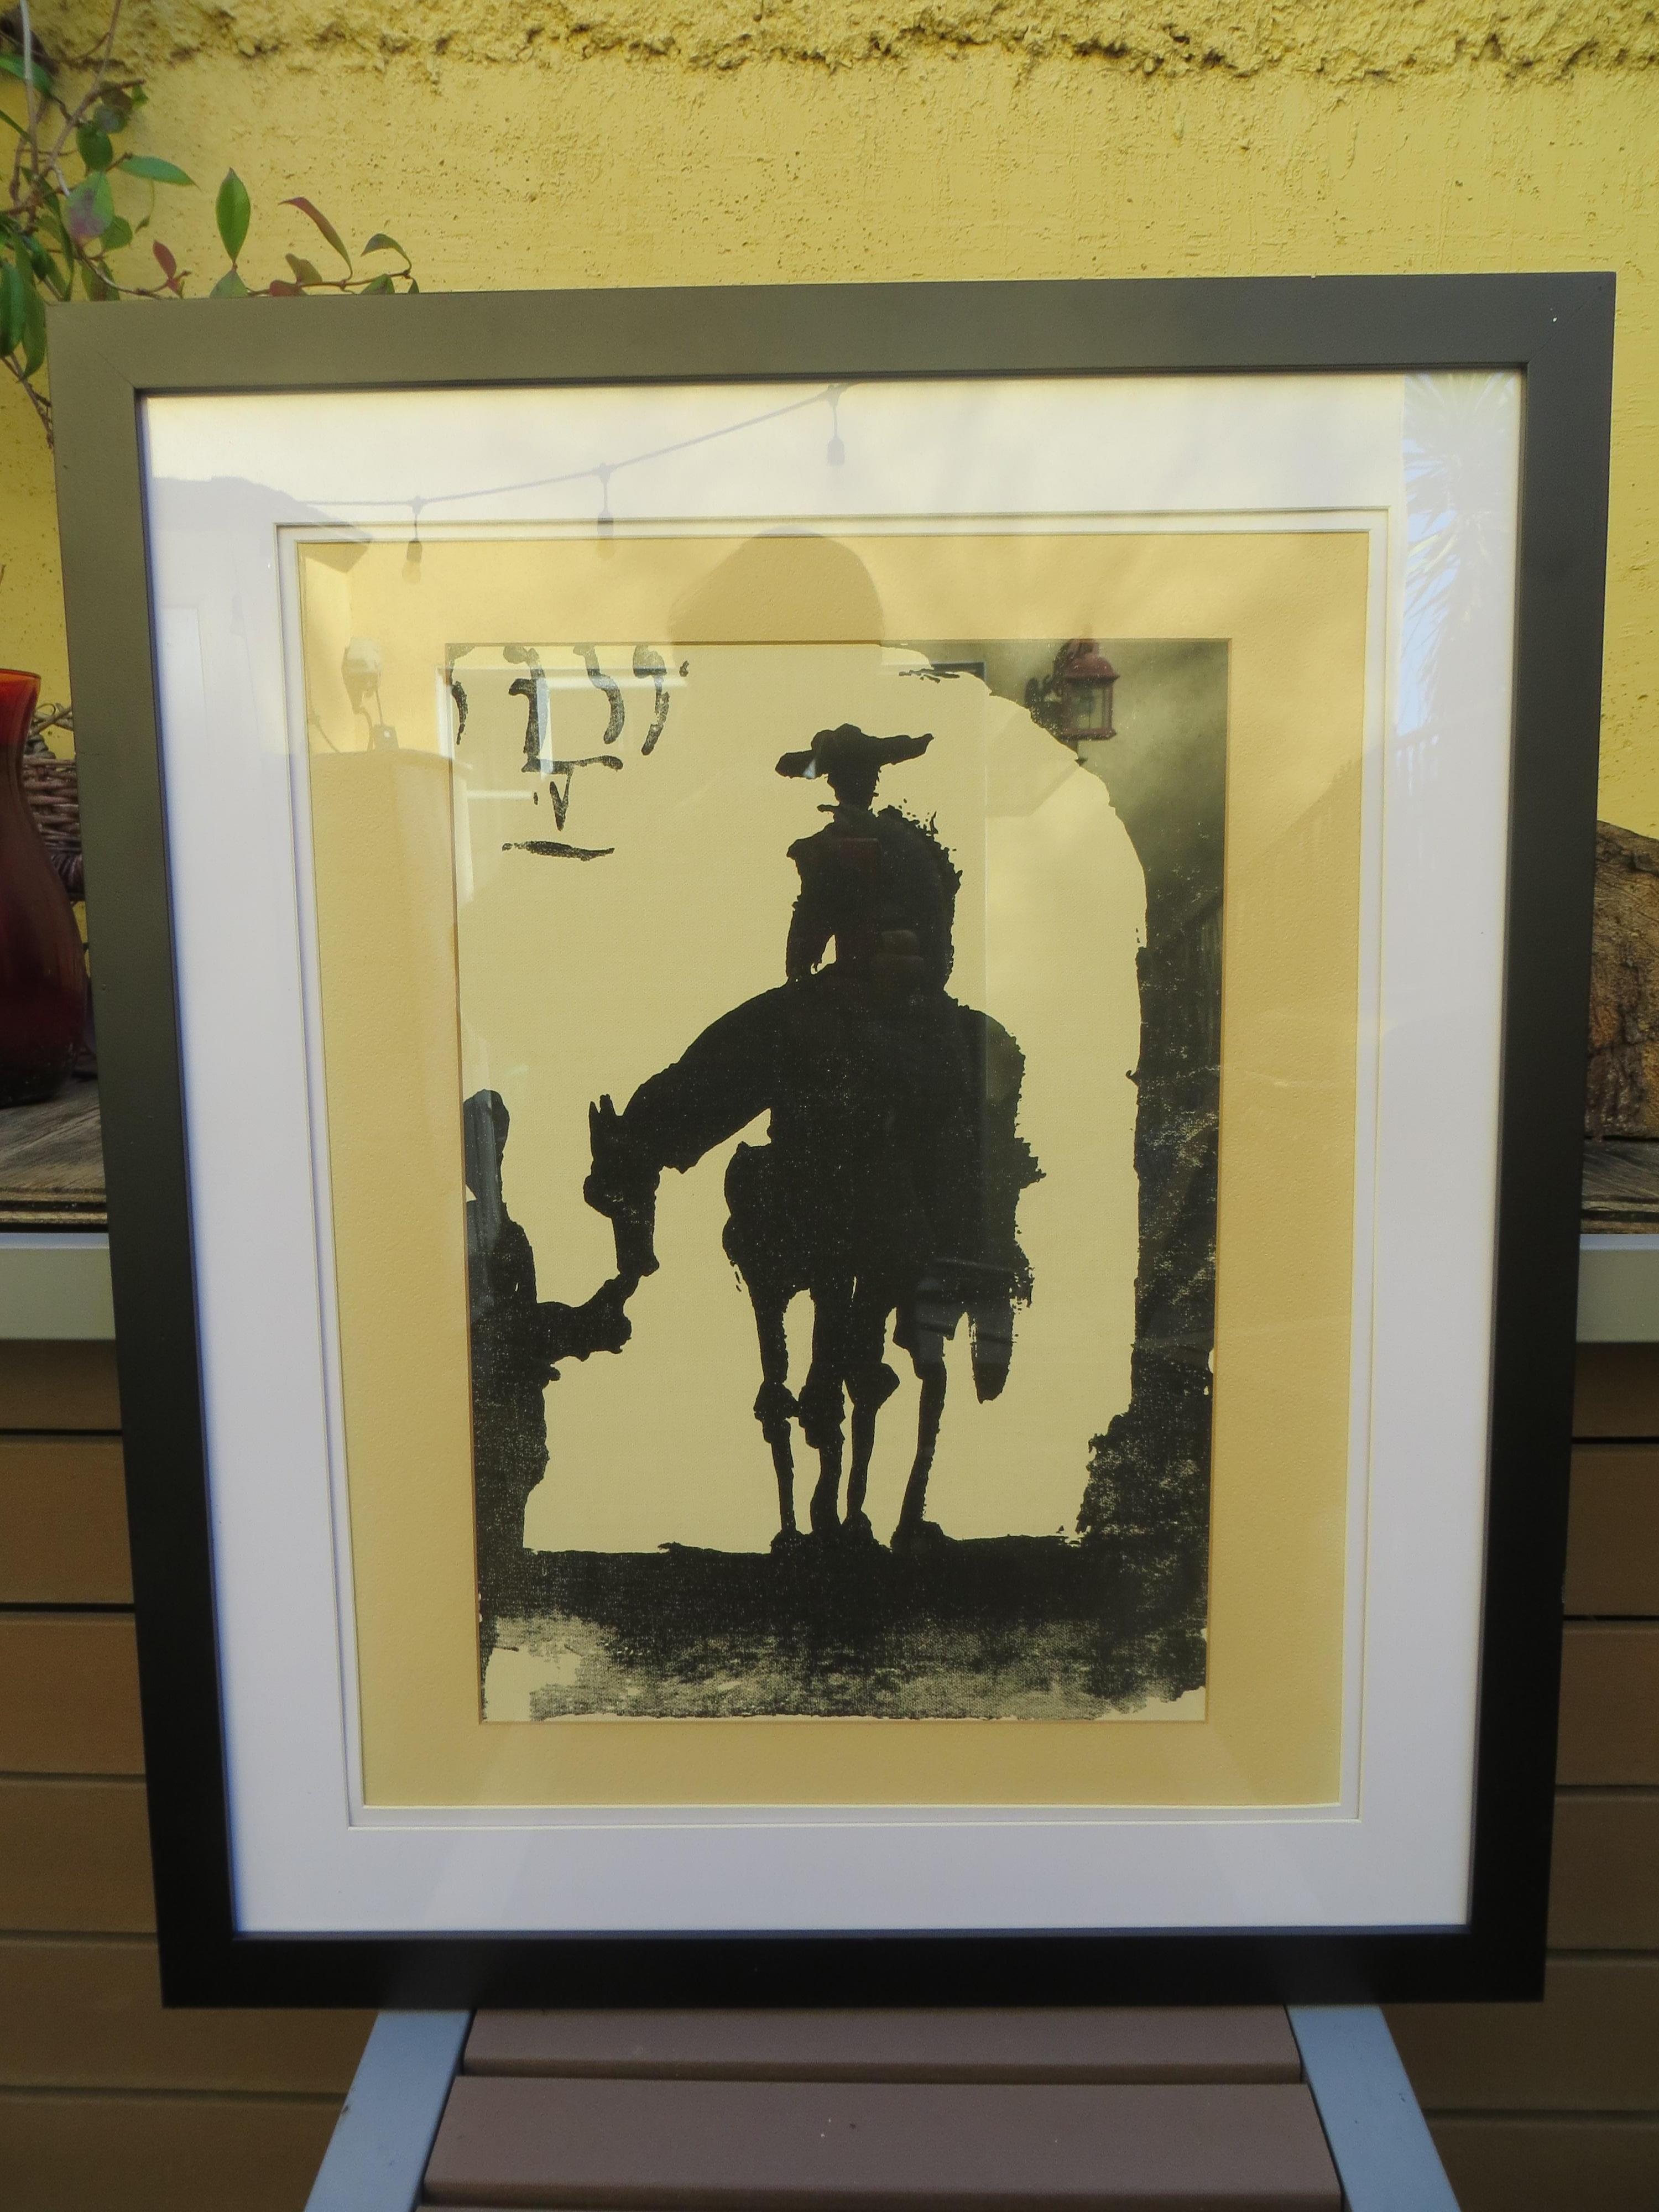 PABLO PICASSO Don Quixote  
The Print  is in perfect condition new framed but not numbered
. Don Quixote is a 1955 sketch by Pablo Picasso of the Spanish literary hero and his sidekick, After Pablo Picasso (Spanish, 1881-1973) 